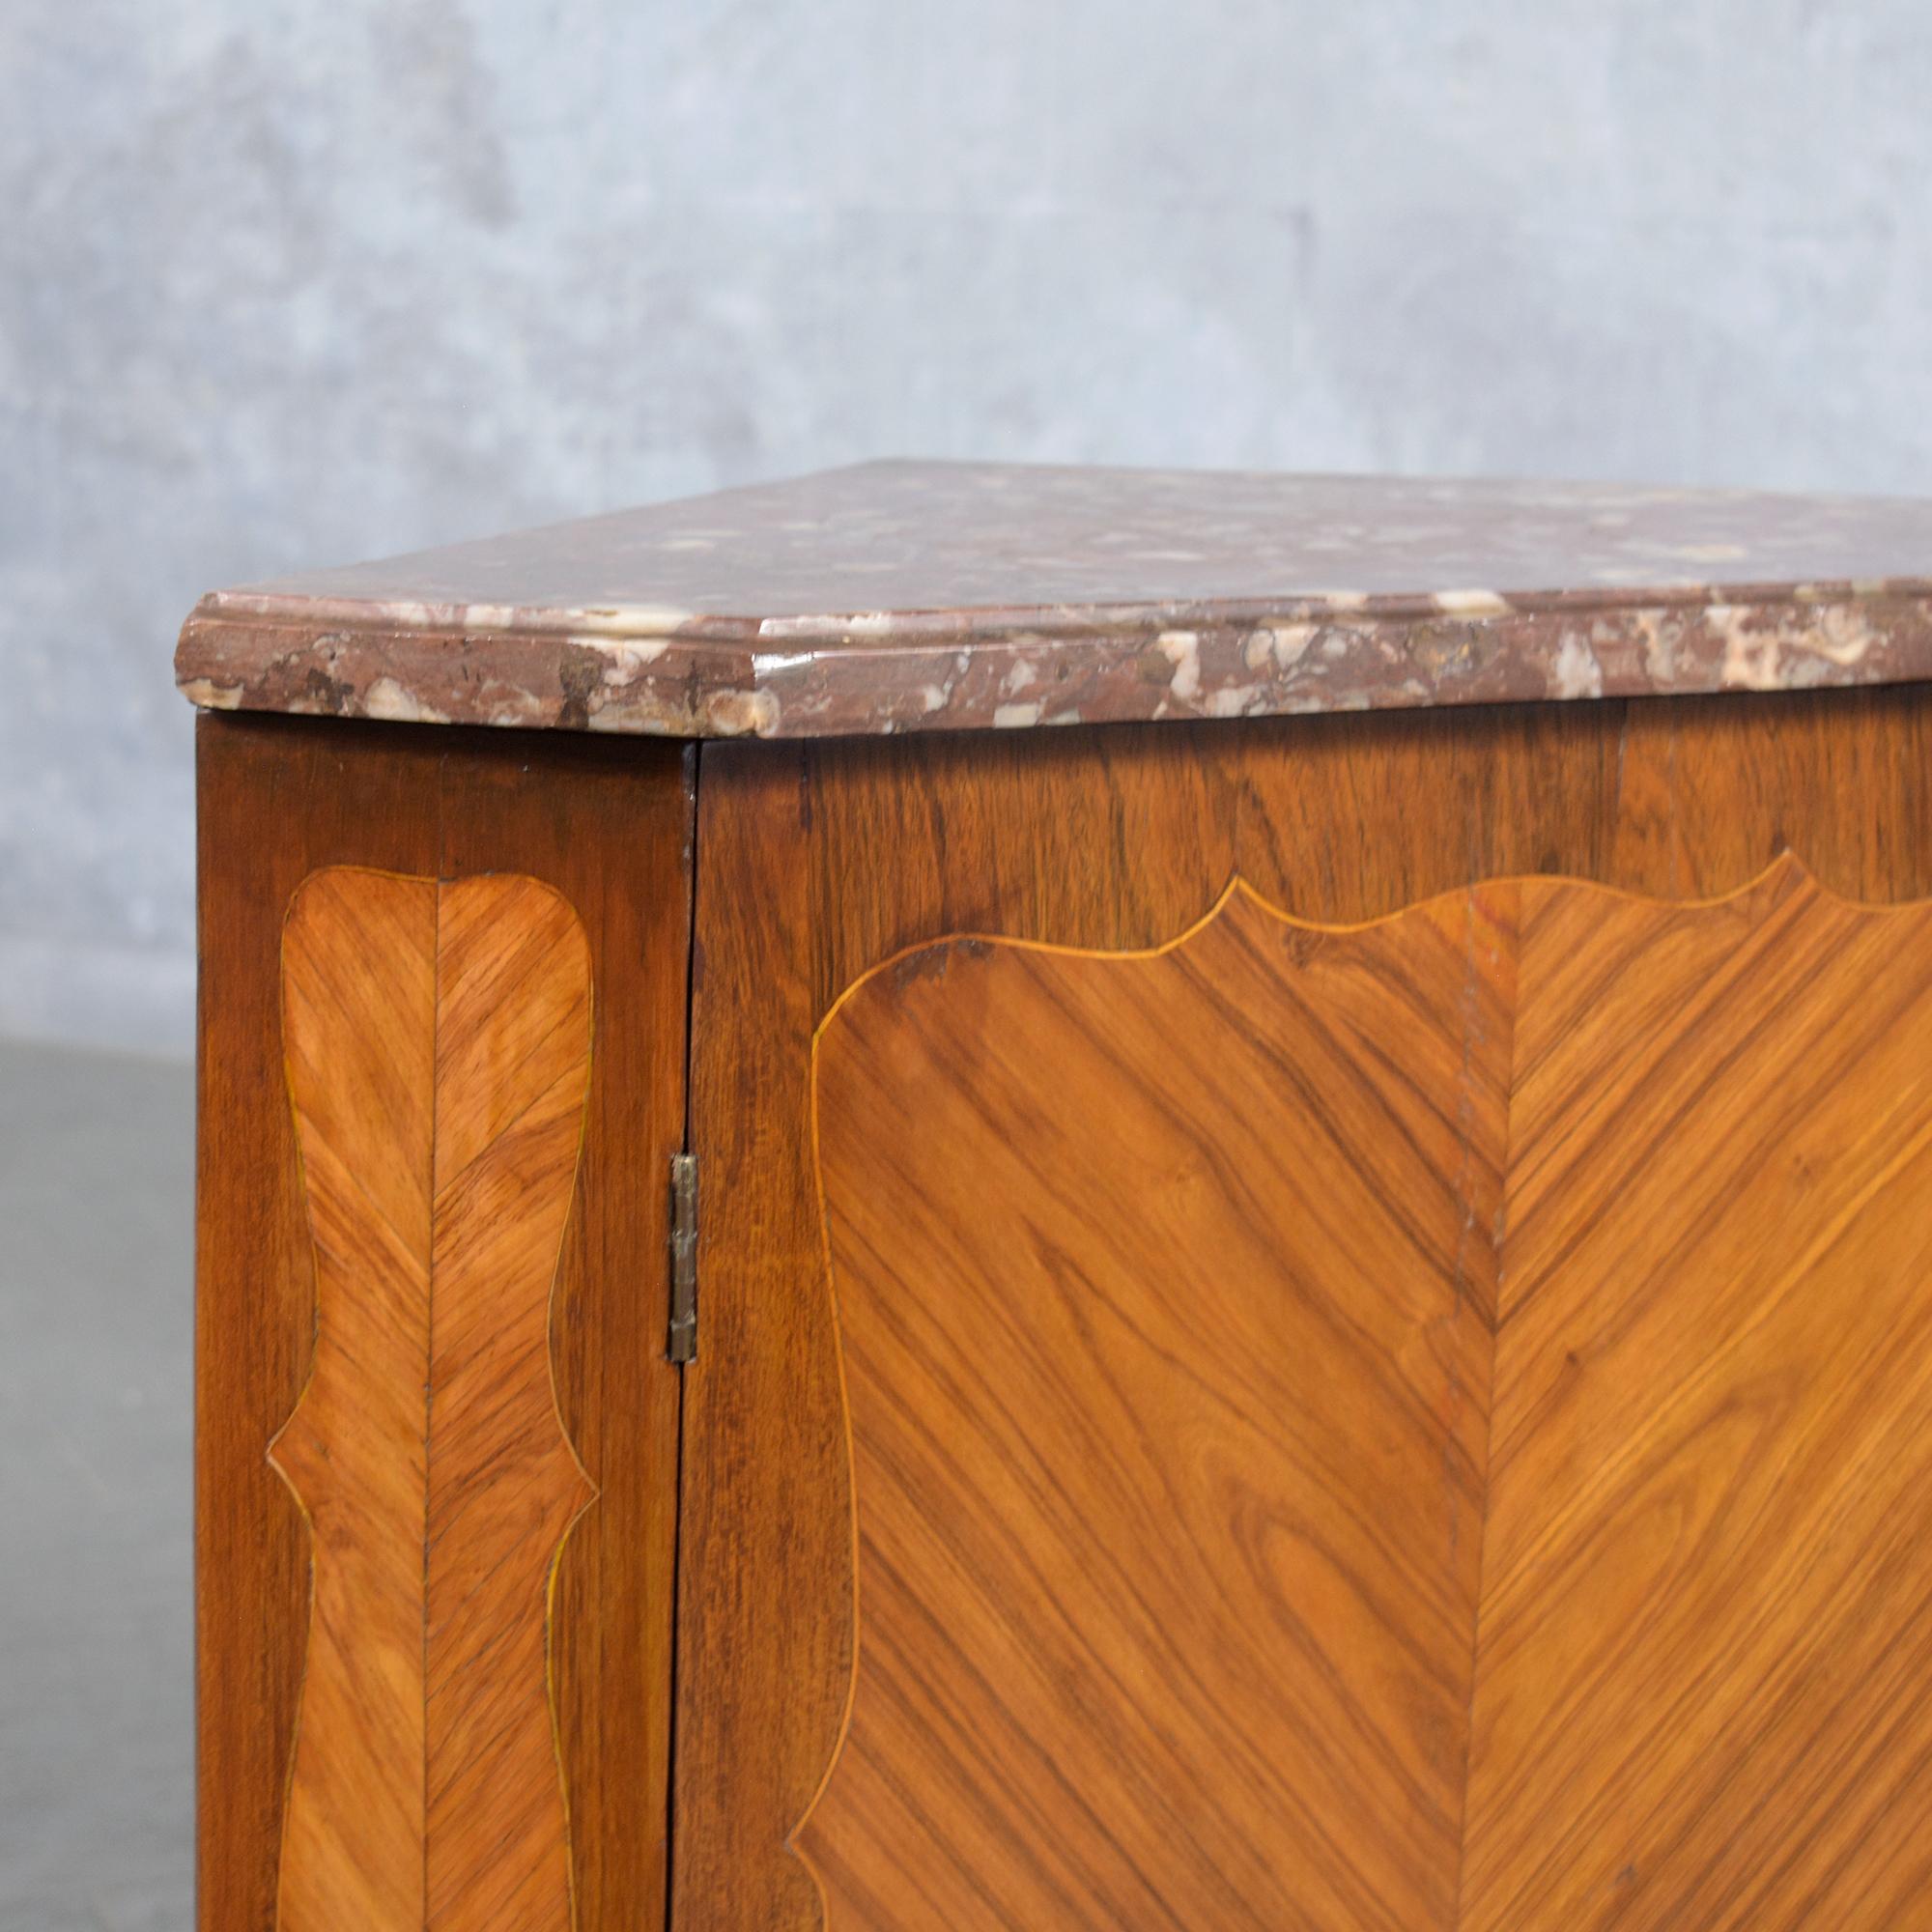 Late 18th-Century French Corner Cabinets with Marble Tops: Restored Elegance For Sale 5